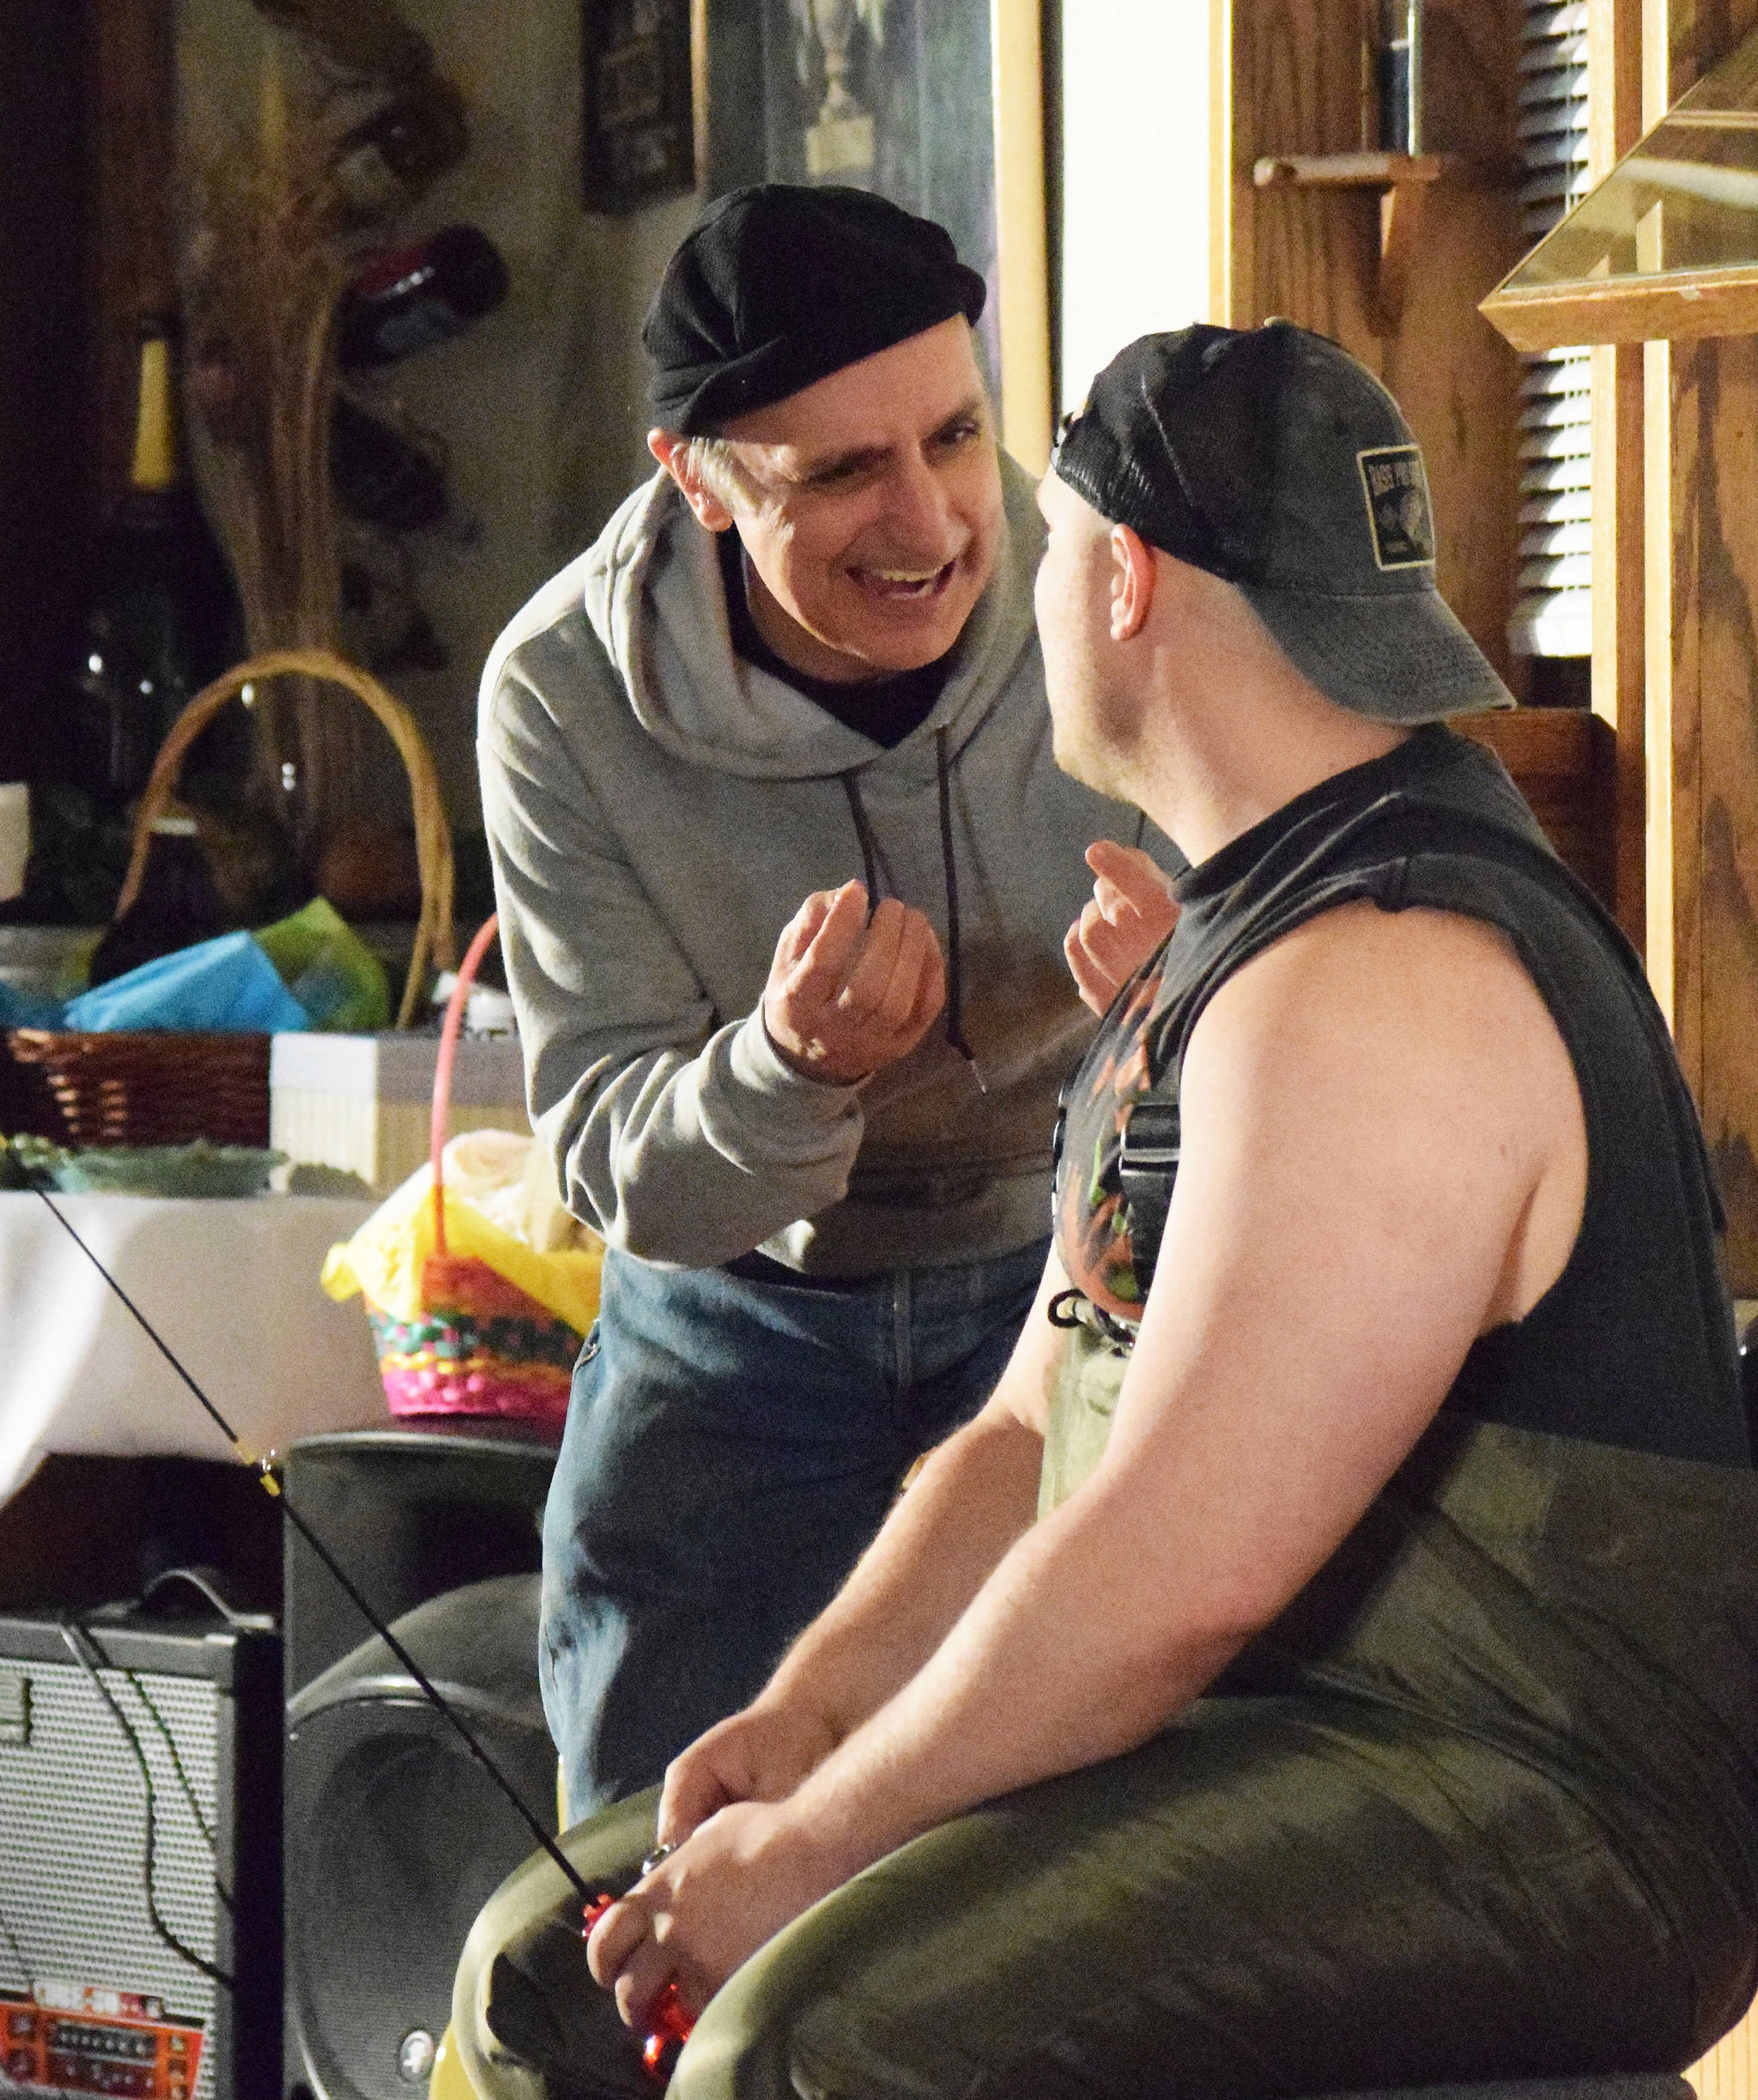 Joe Rizzo (left) acts out a scene with Tyler Payment during Triumvirant’s dinner theatre production of “Sockeye Balboa” Friday, April 5, 2019, at Mykel’s Restaurant in Soldotna. (Photo by Joey Klecka/Peninsula Clarion)